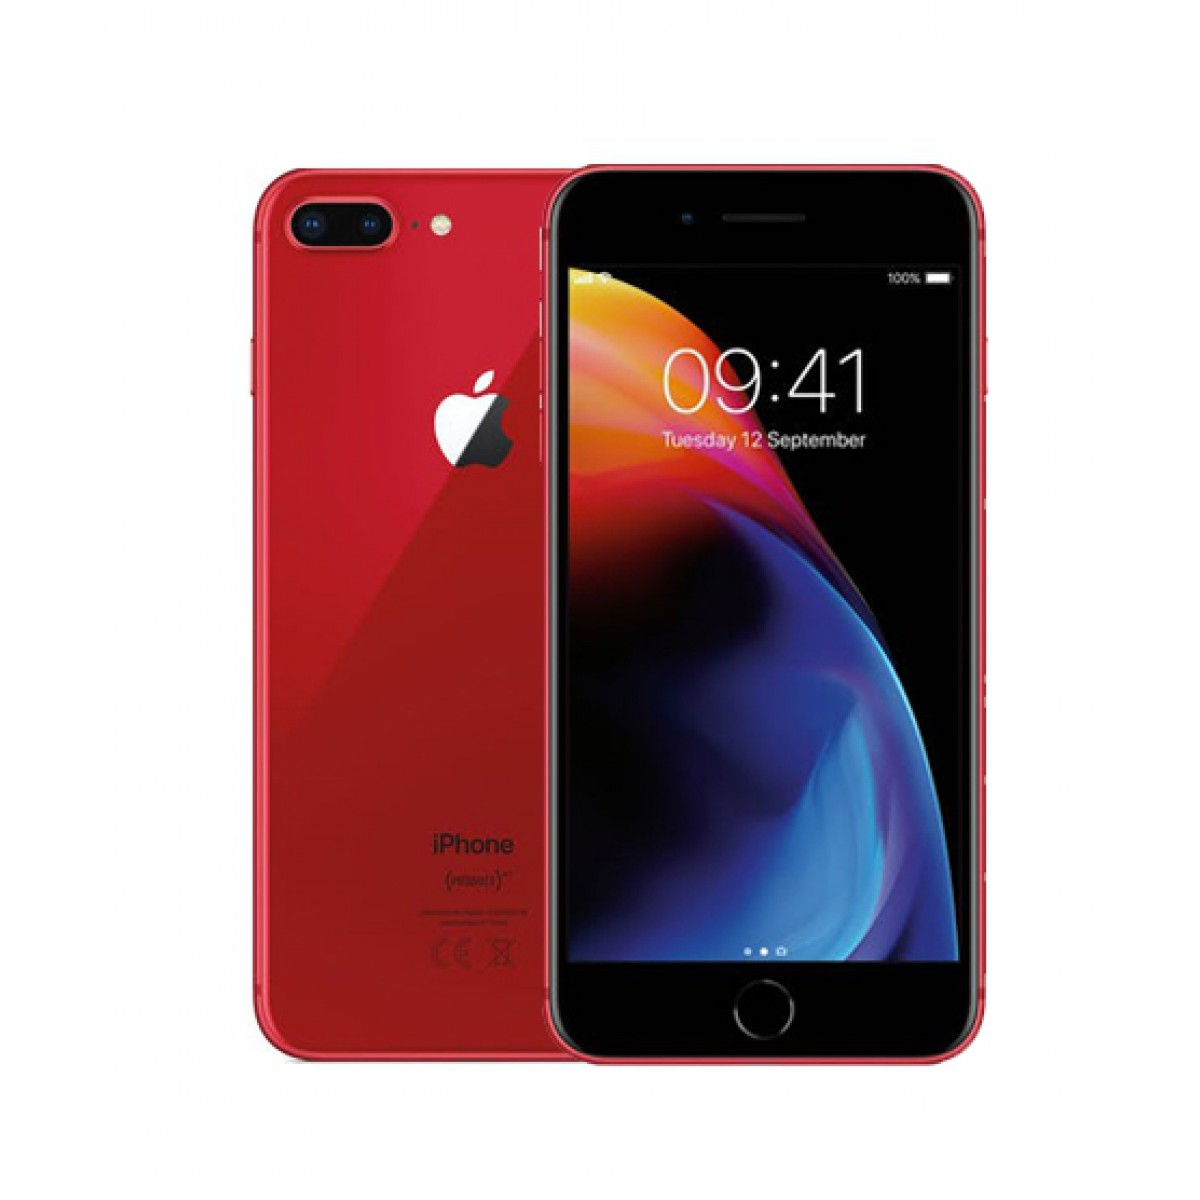 Apple iPhone 8 Plus (PRODUCT)RED - 64GB - (Unlocked) A1864 